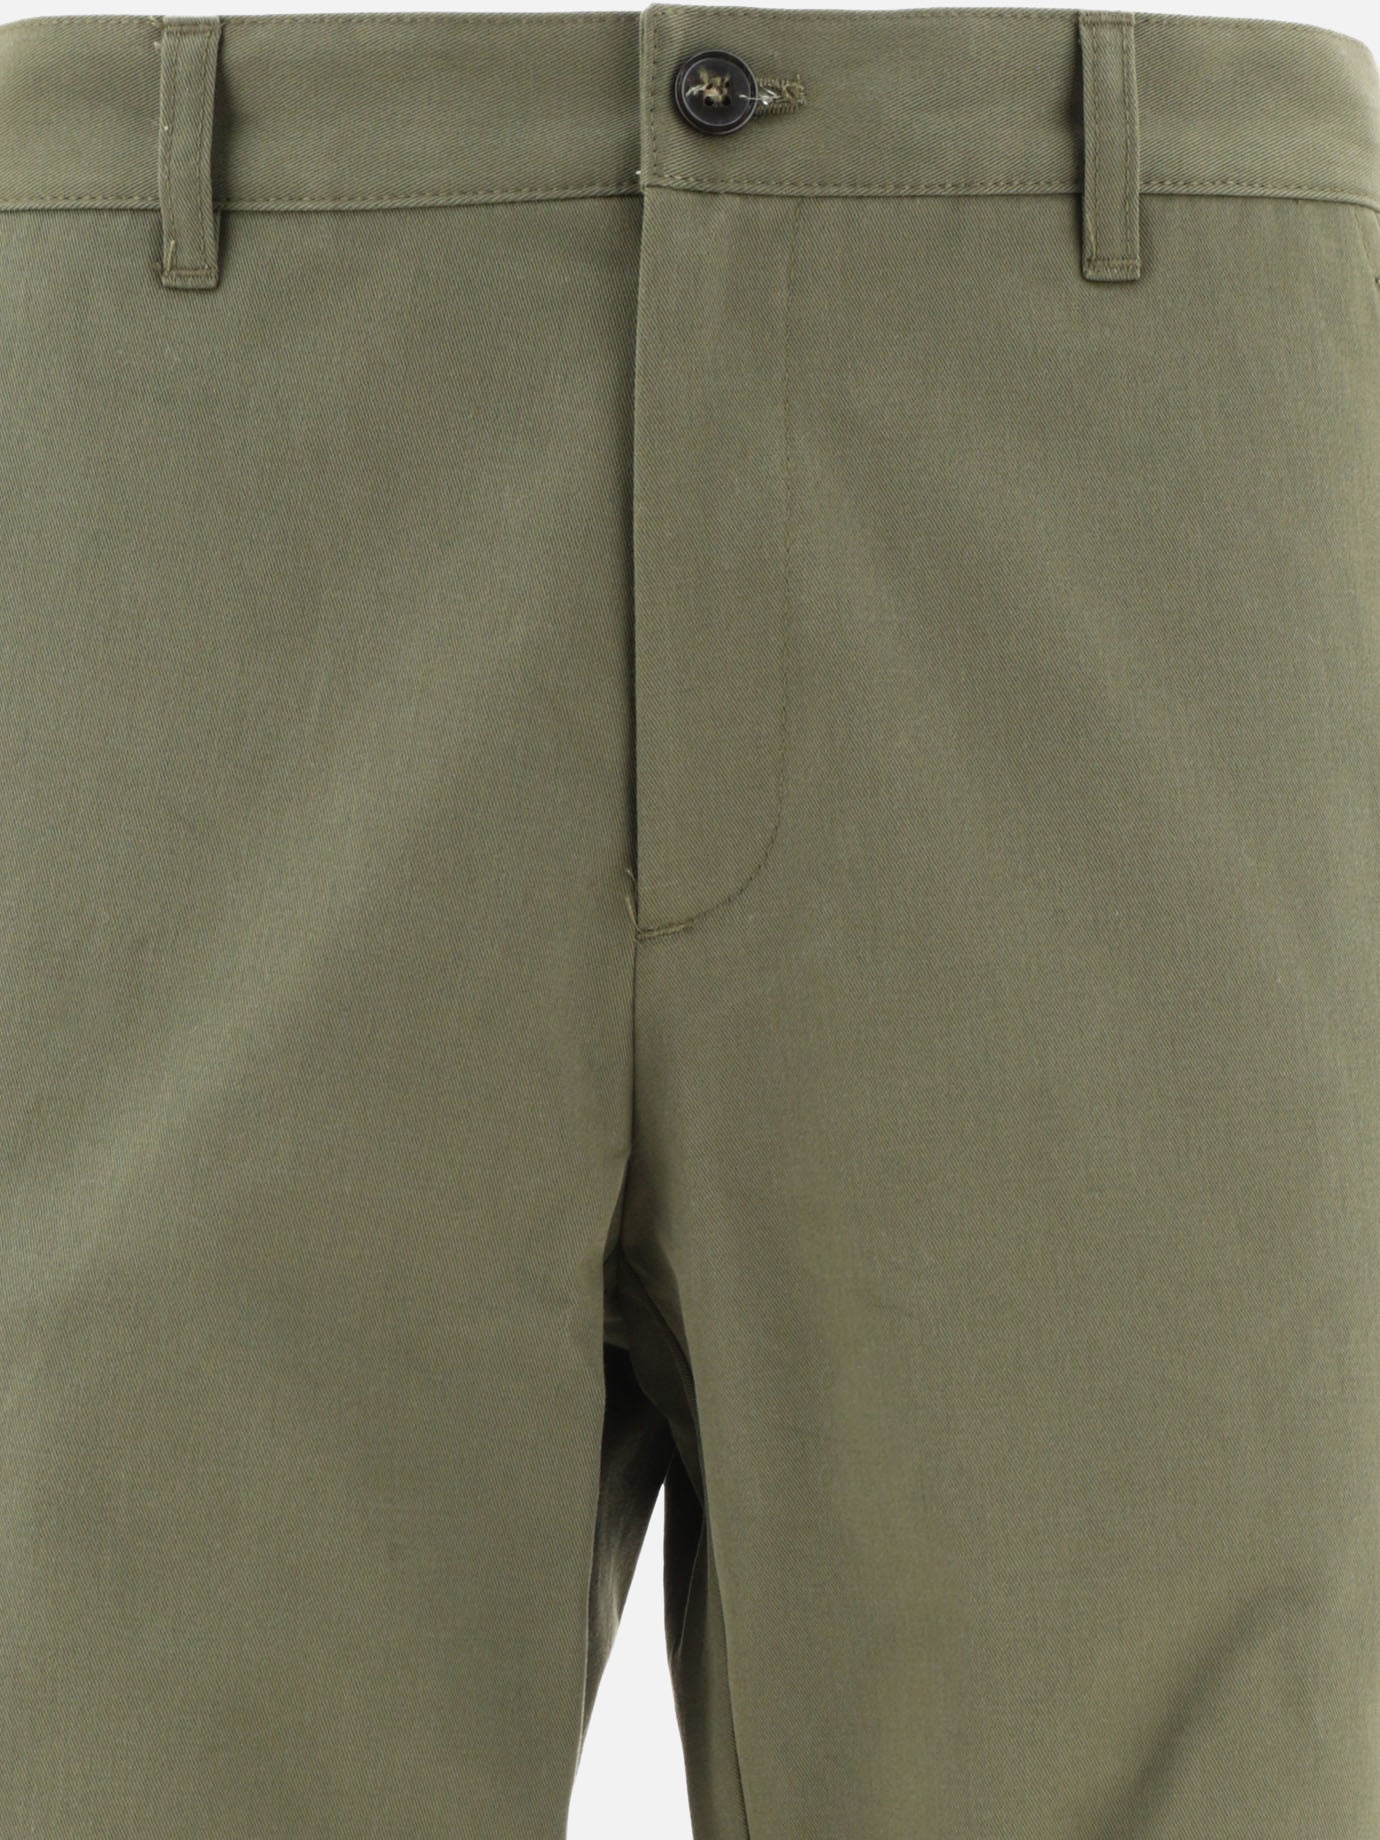 "Chino Ville" trousers